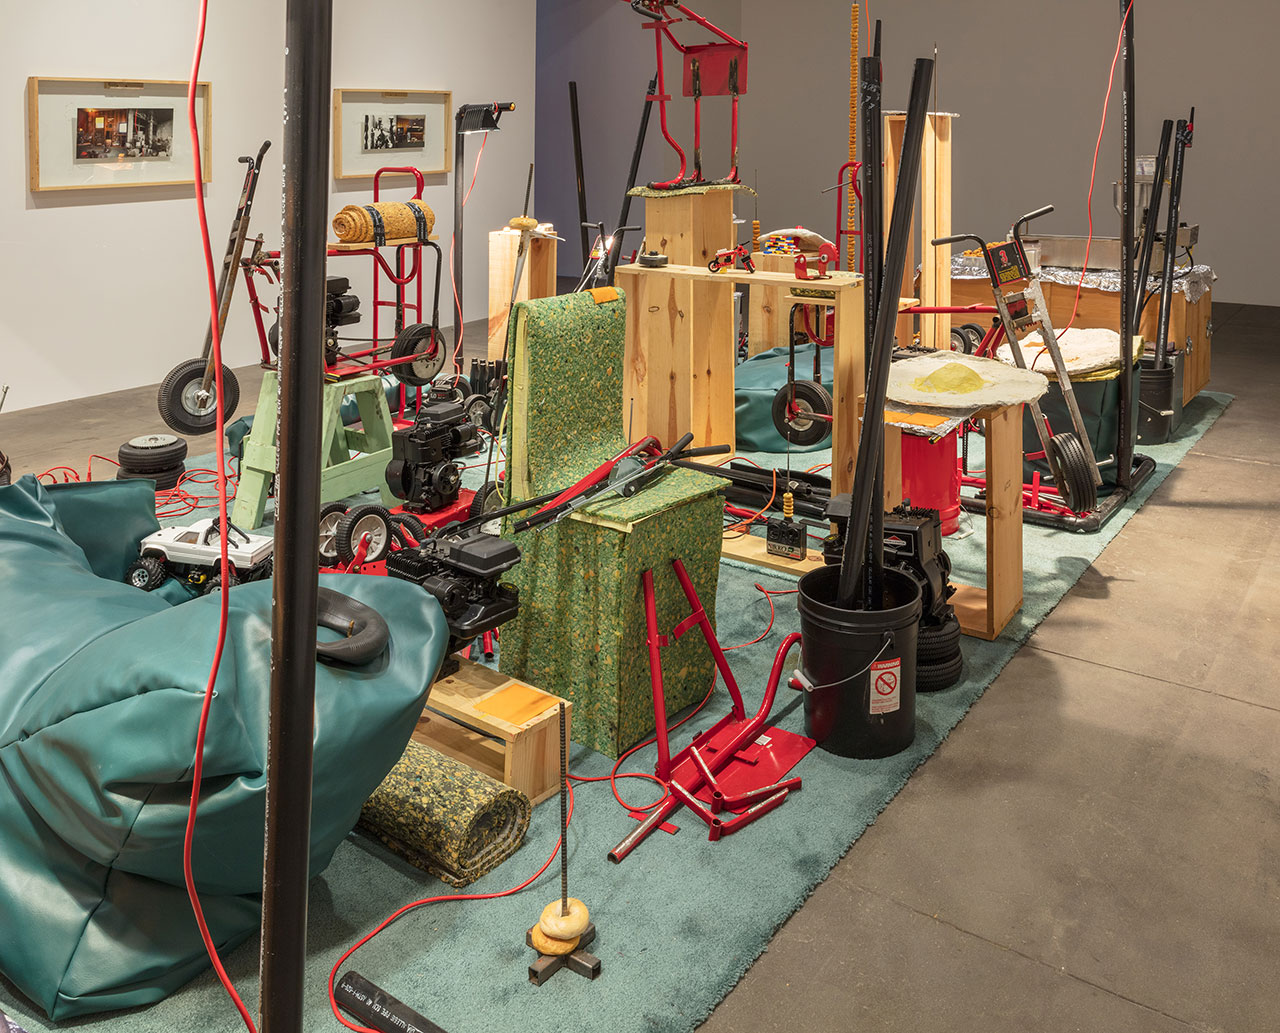 Jason Rhoades, My Brother / Brancuzi, 1995. Mixed media. Dimensions variable. Installation view, ‘Jason Rhoades. Installations, 1994 – 2006’. Hauser &amp; Wirth Los Angeles, 2017 © The Estate of Jason Rhoades. Courtesy Private Collection, Switzerland. Photo by Fredrik Nilsen.